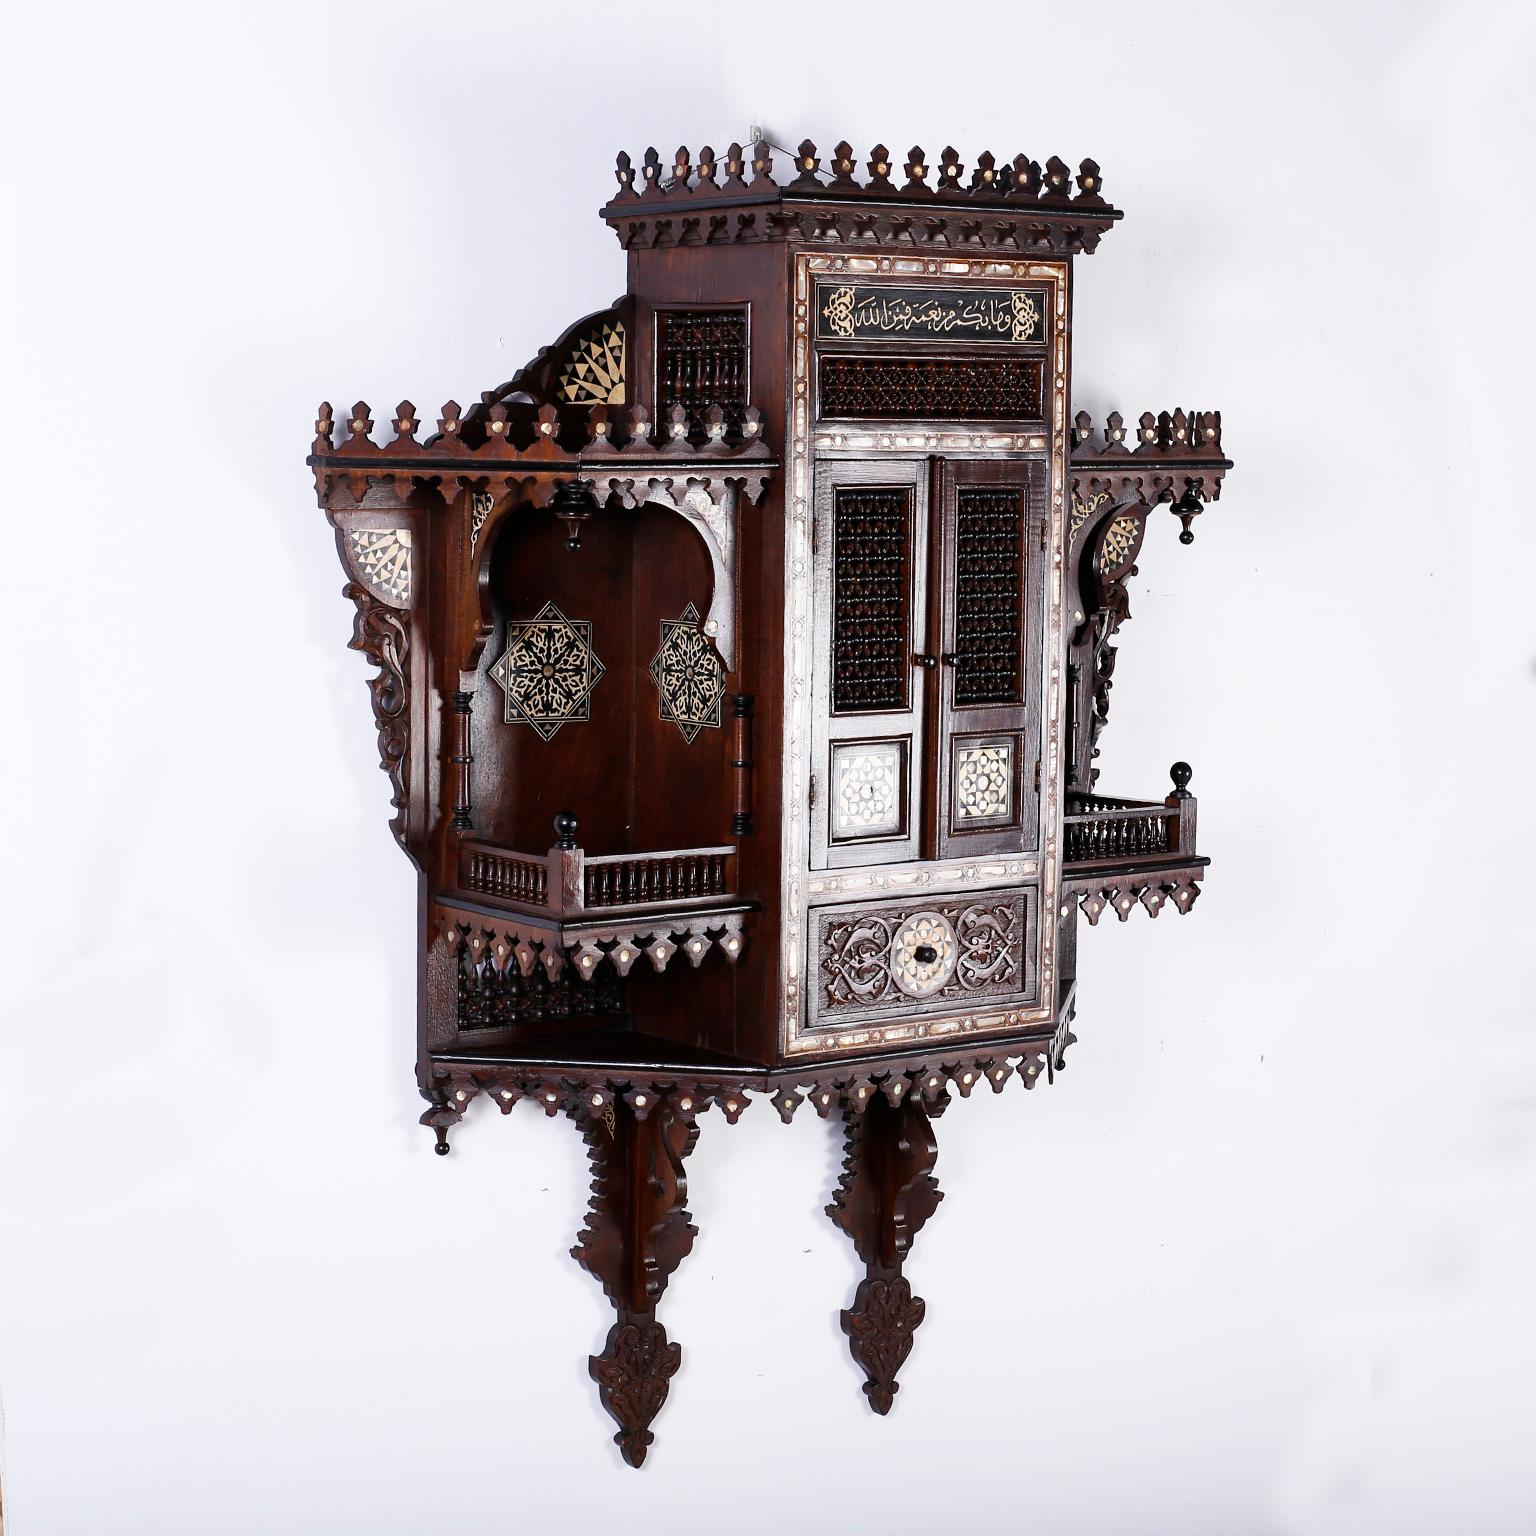 Antique Moroccan wall cabinet crafted in mahogany and featuring turrets, Moorish arches, columns, balustrades, inlaid mother of pearl, ebony and bone medallions, floral carvings and an overall generous scale. Best of its kind.